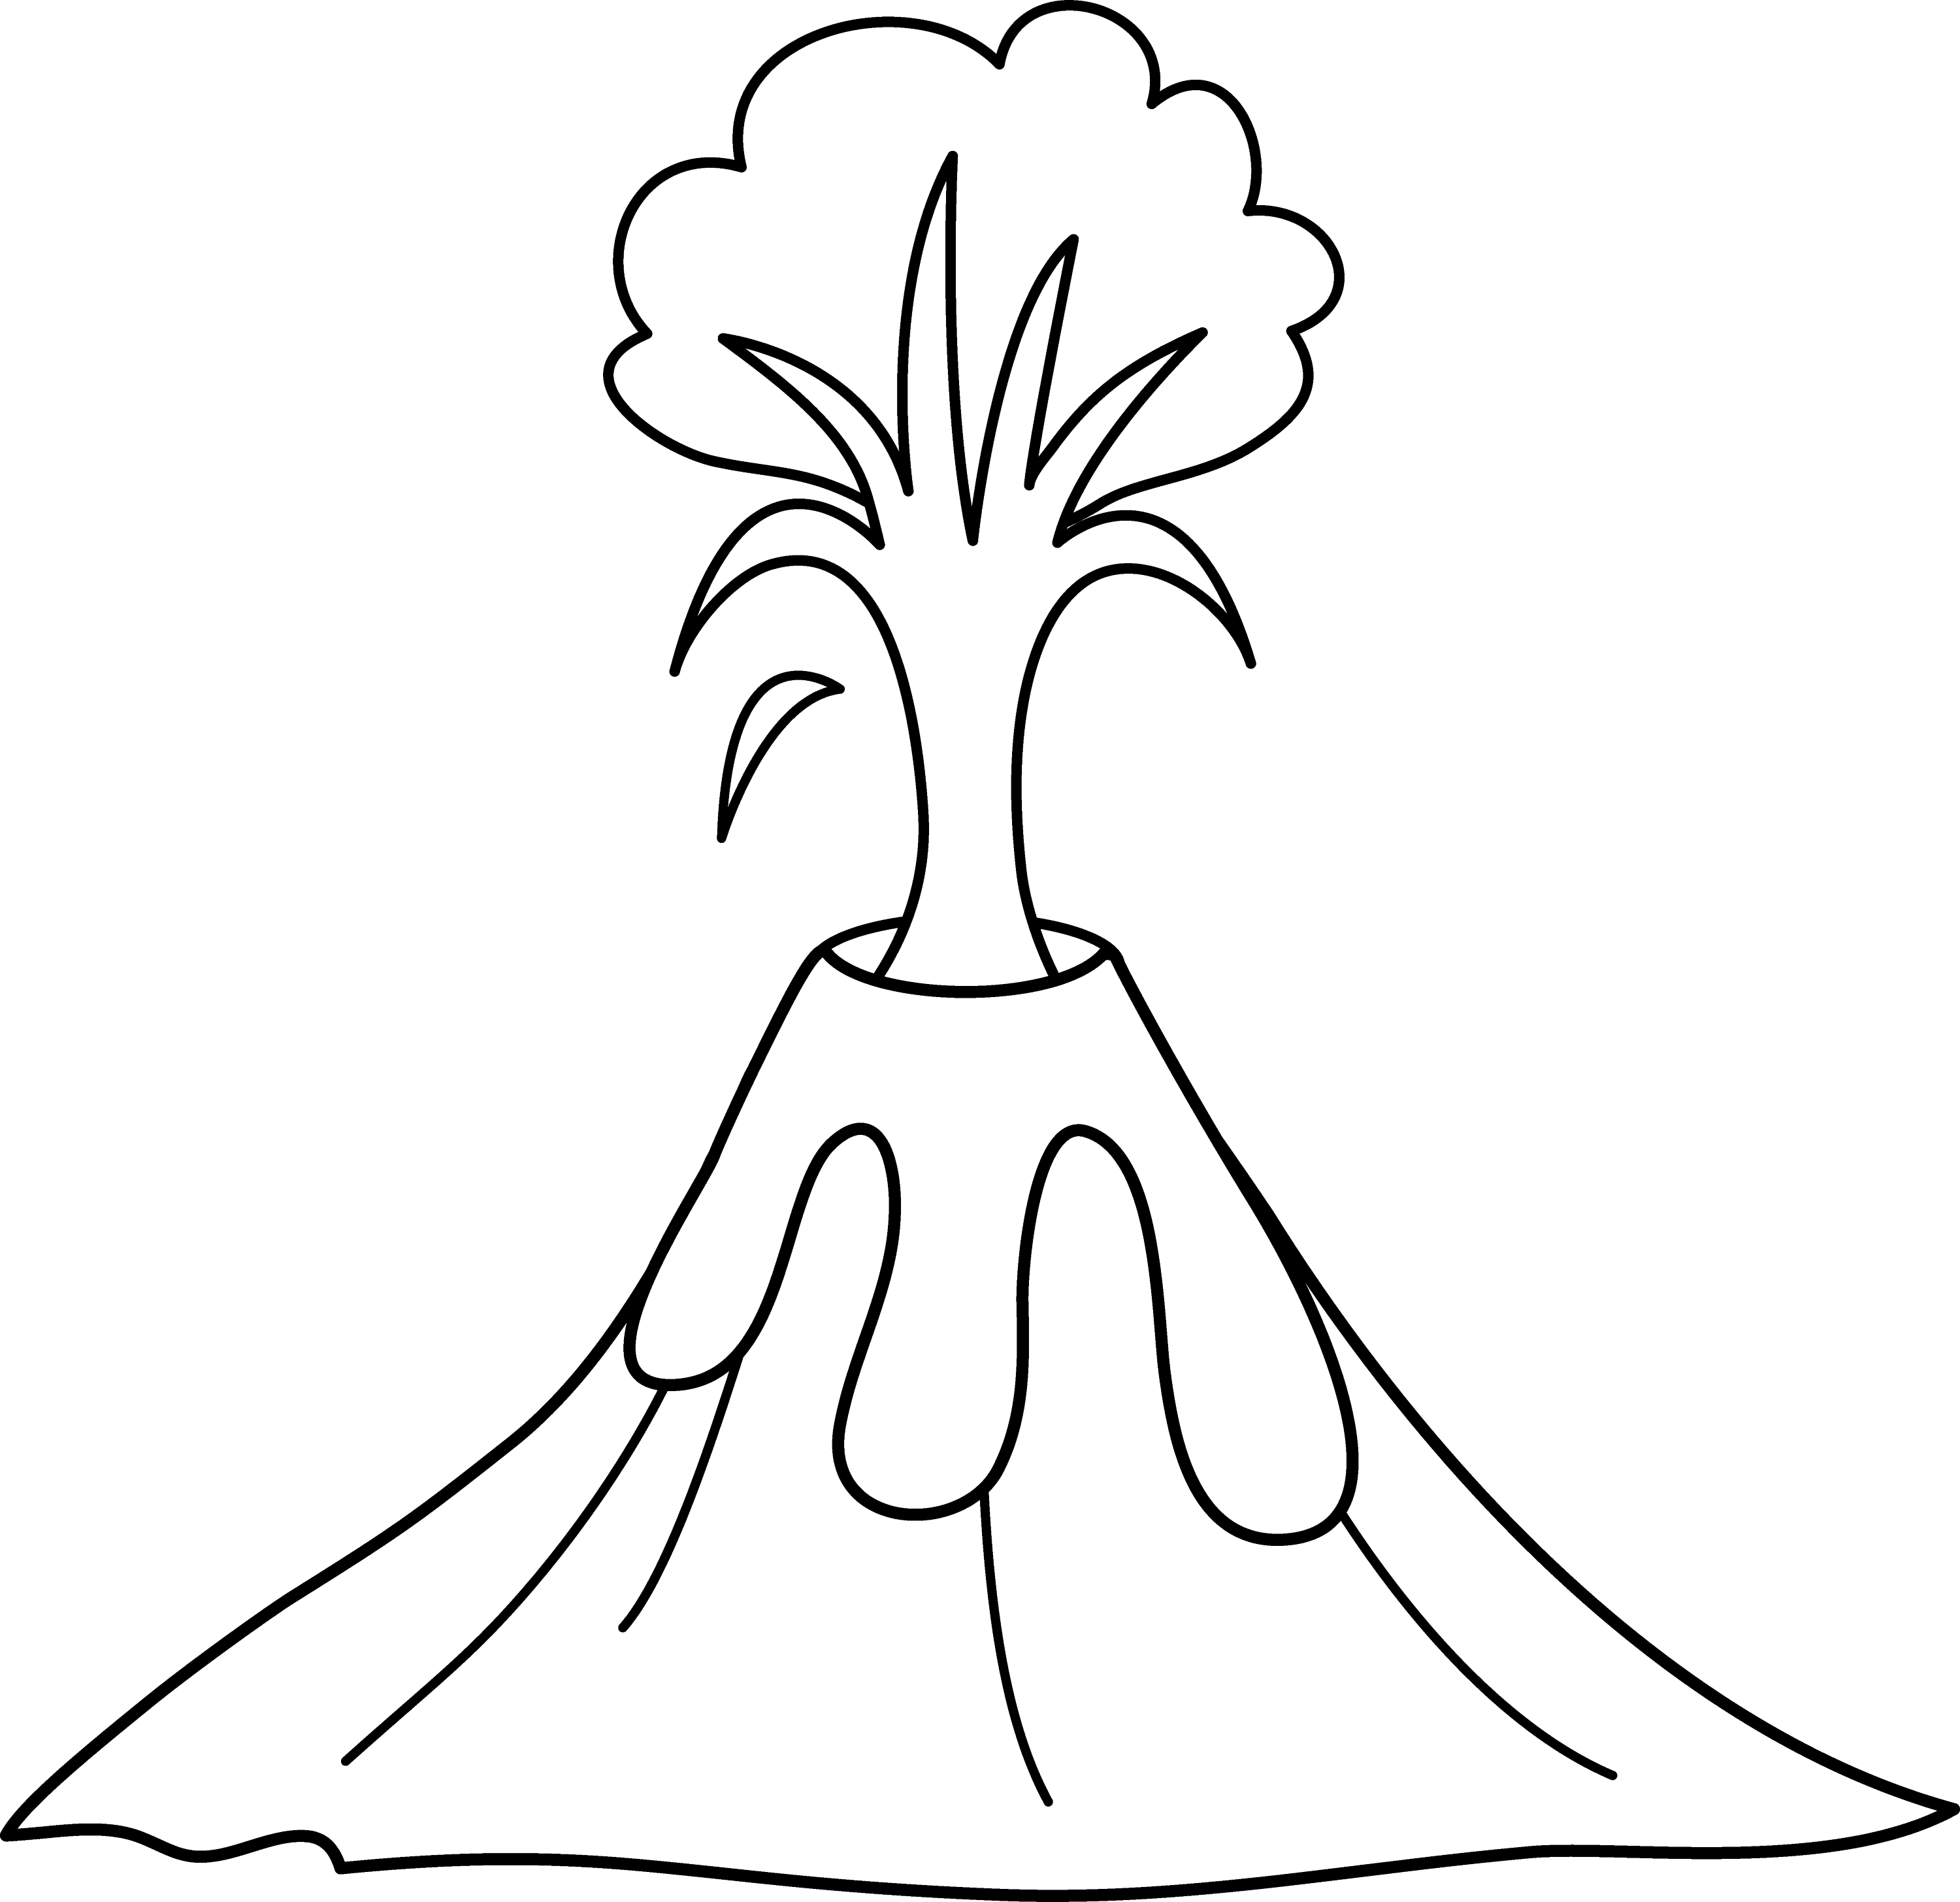 clipart of a volcano - photo #41